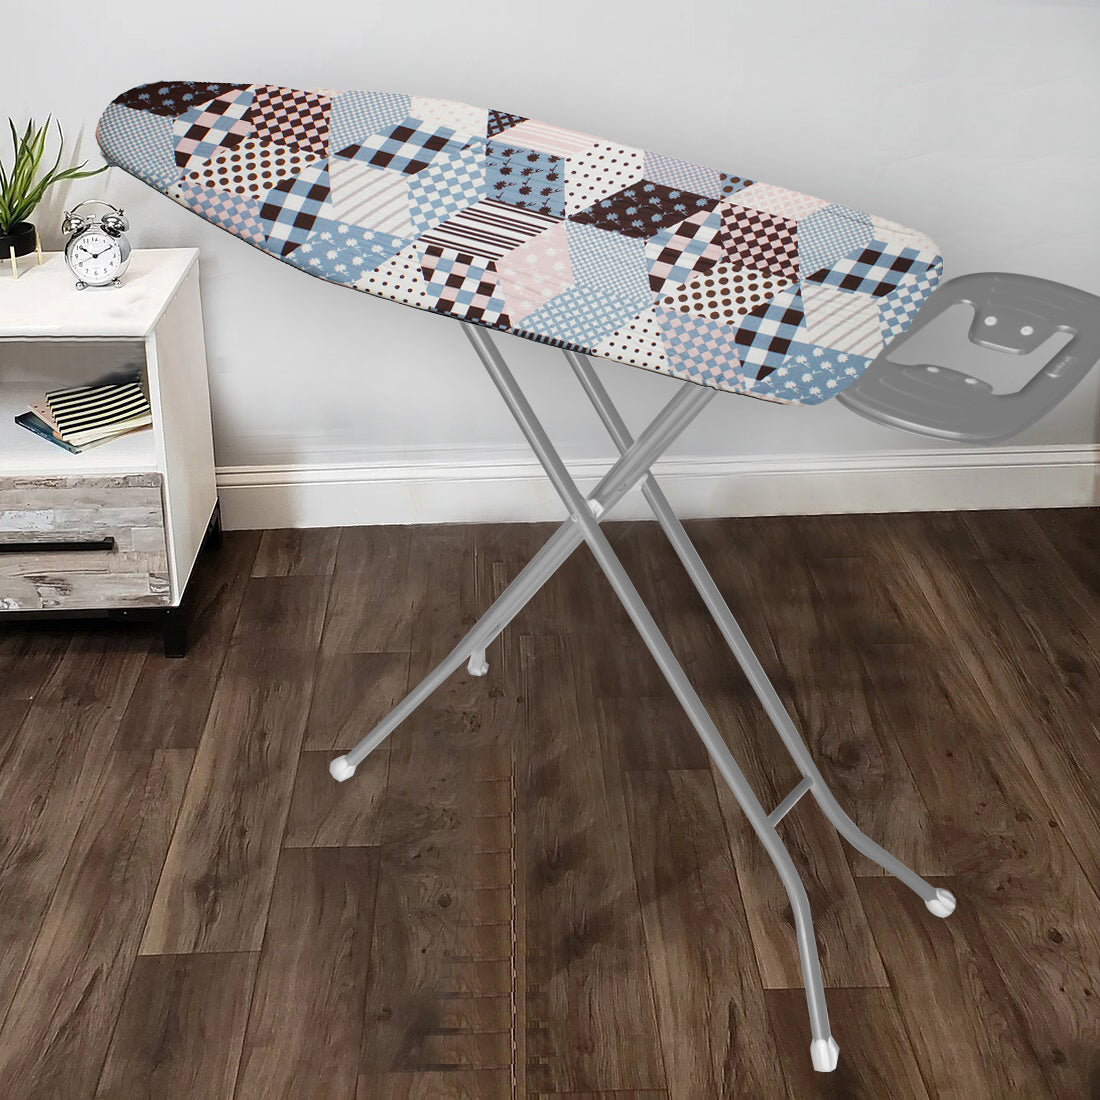 110x33cm Mesh Ironing Board with Safety Iron Rest - Pattern